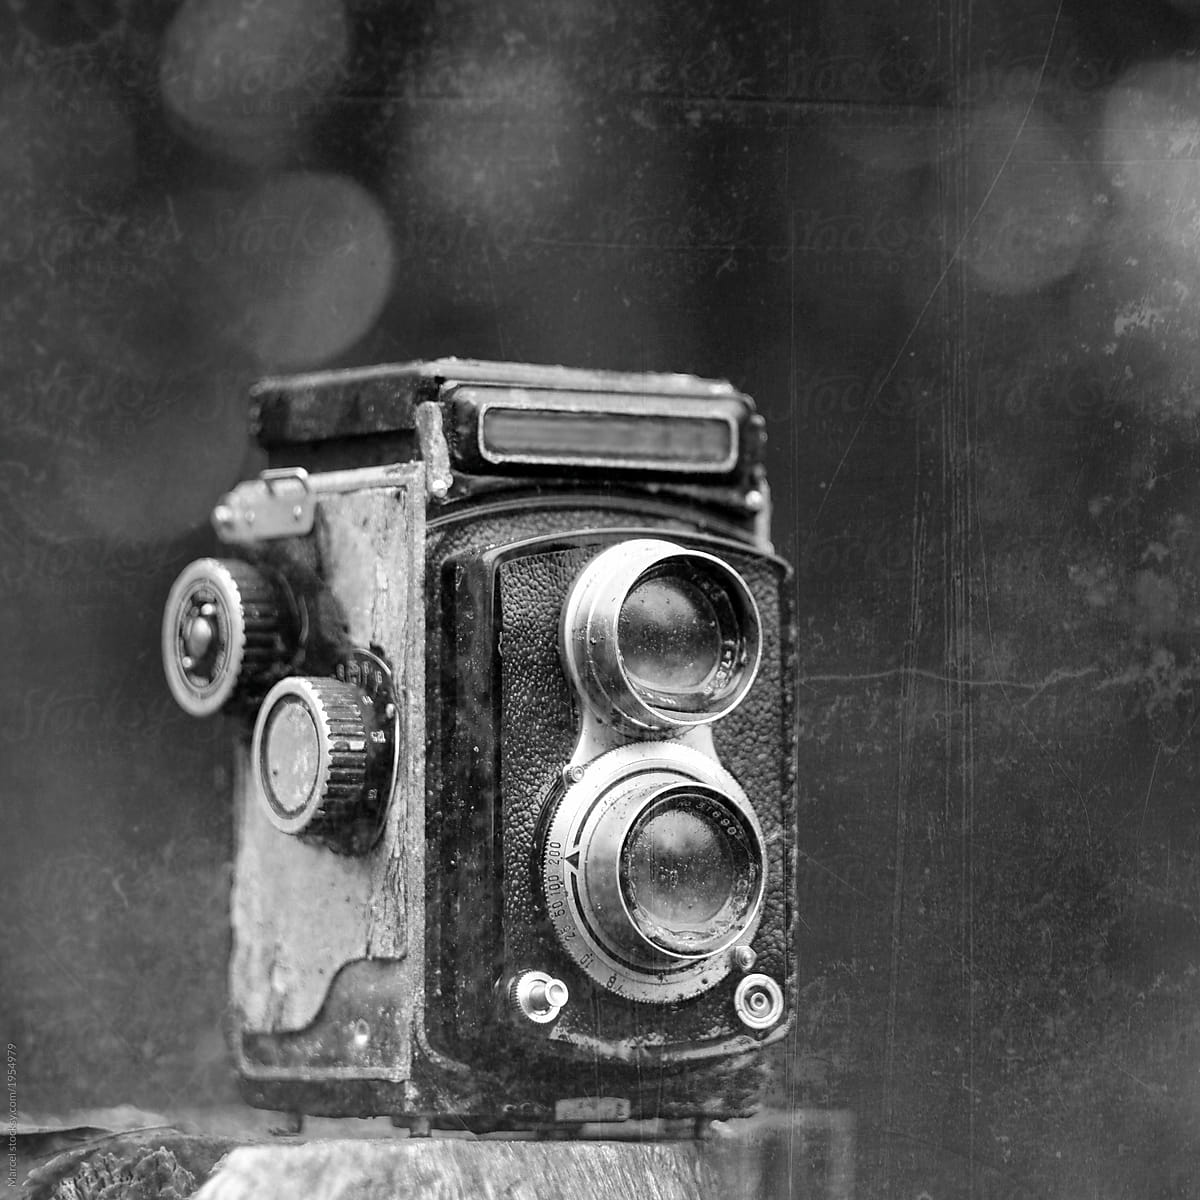 Grungy b&w photo of dirty old camera